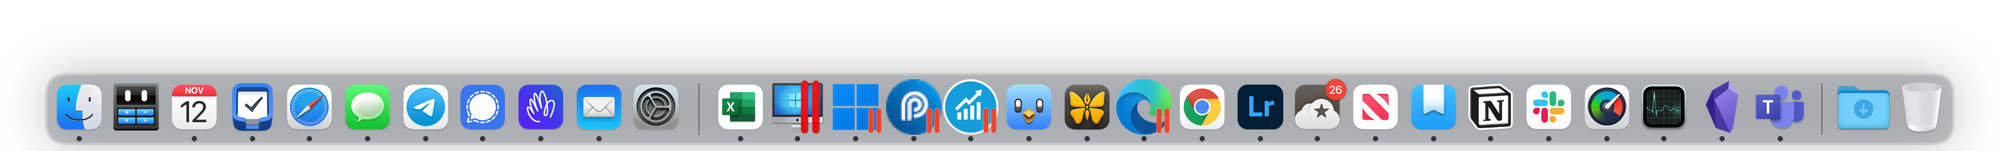 I may not operate with *all* these apps *all the time*, but it's not out of the question to work with 80% of this open at once.